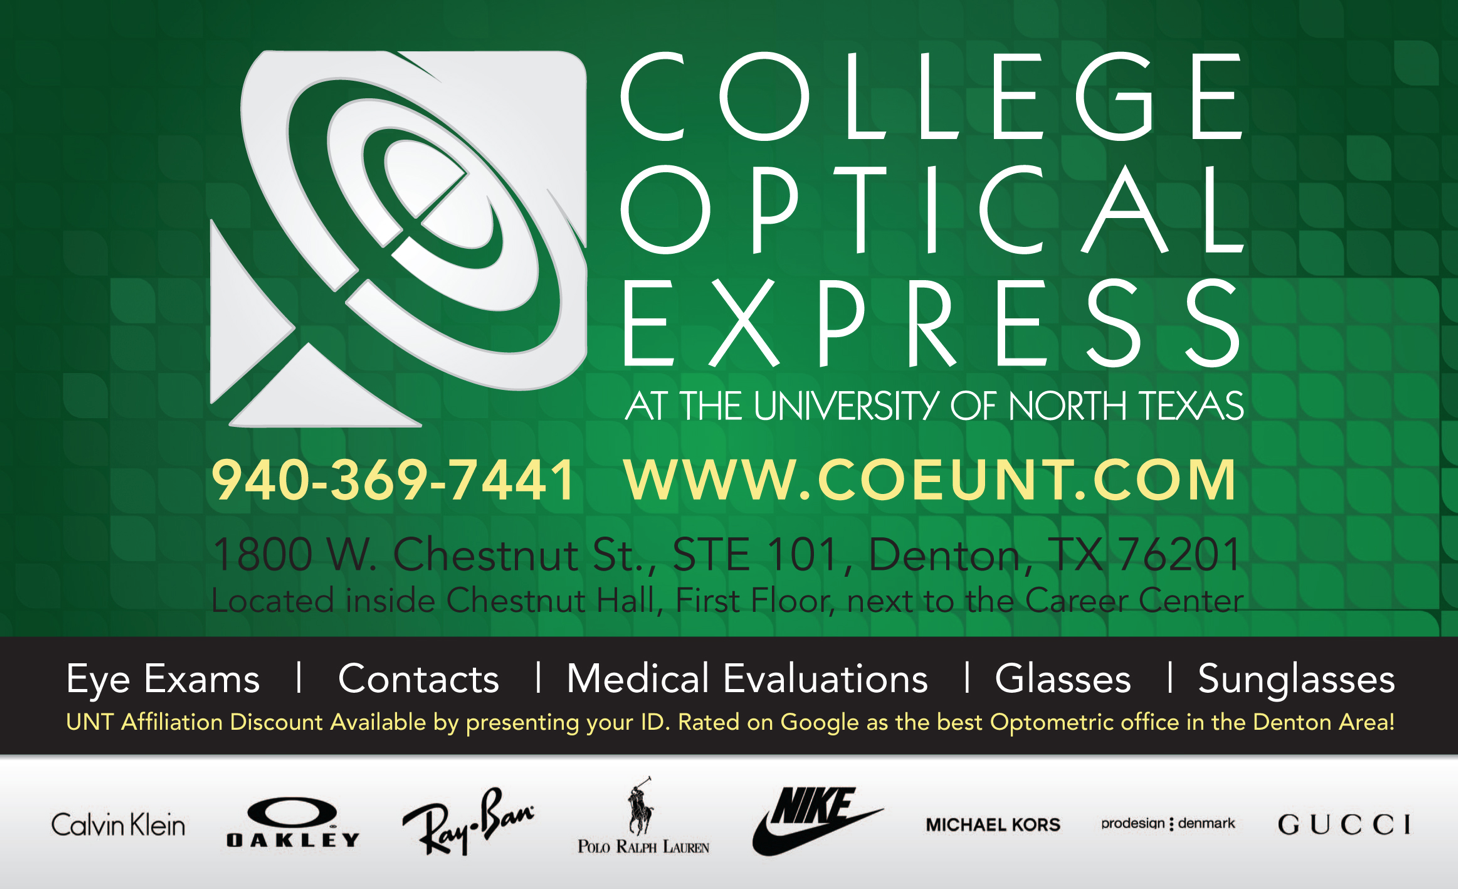 2012 Flier For College Optical Express